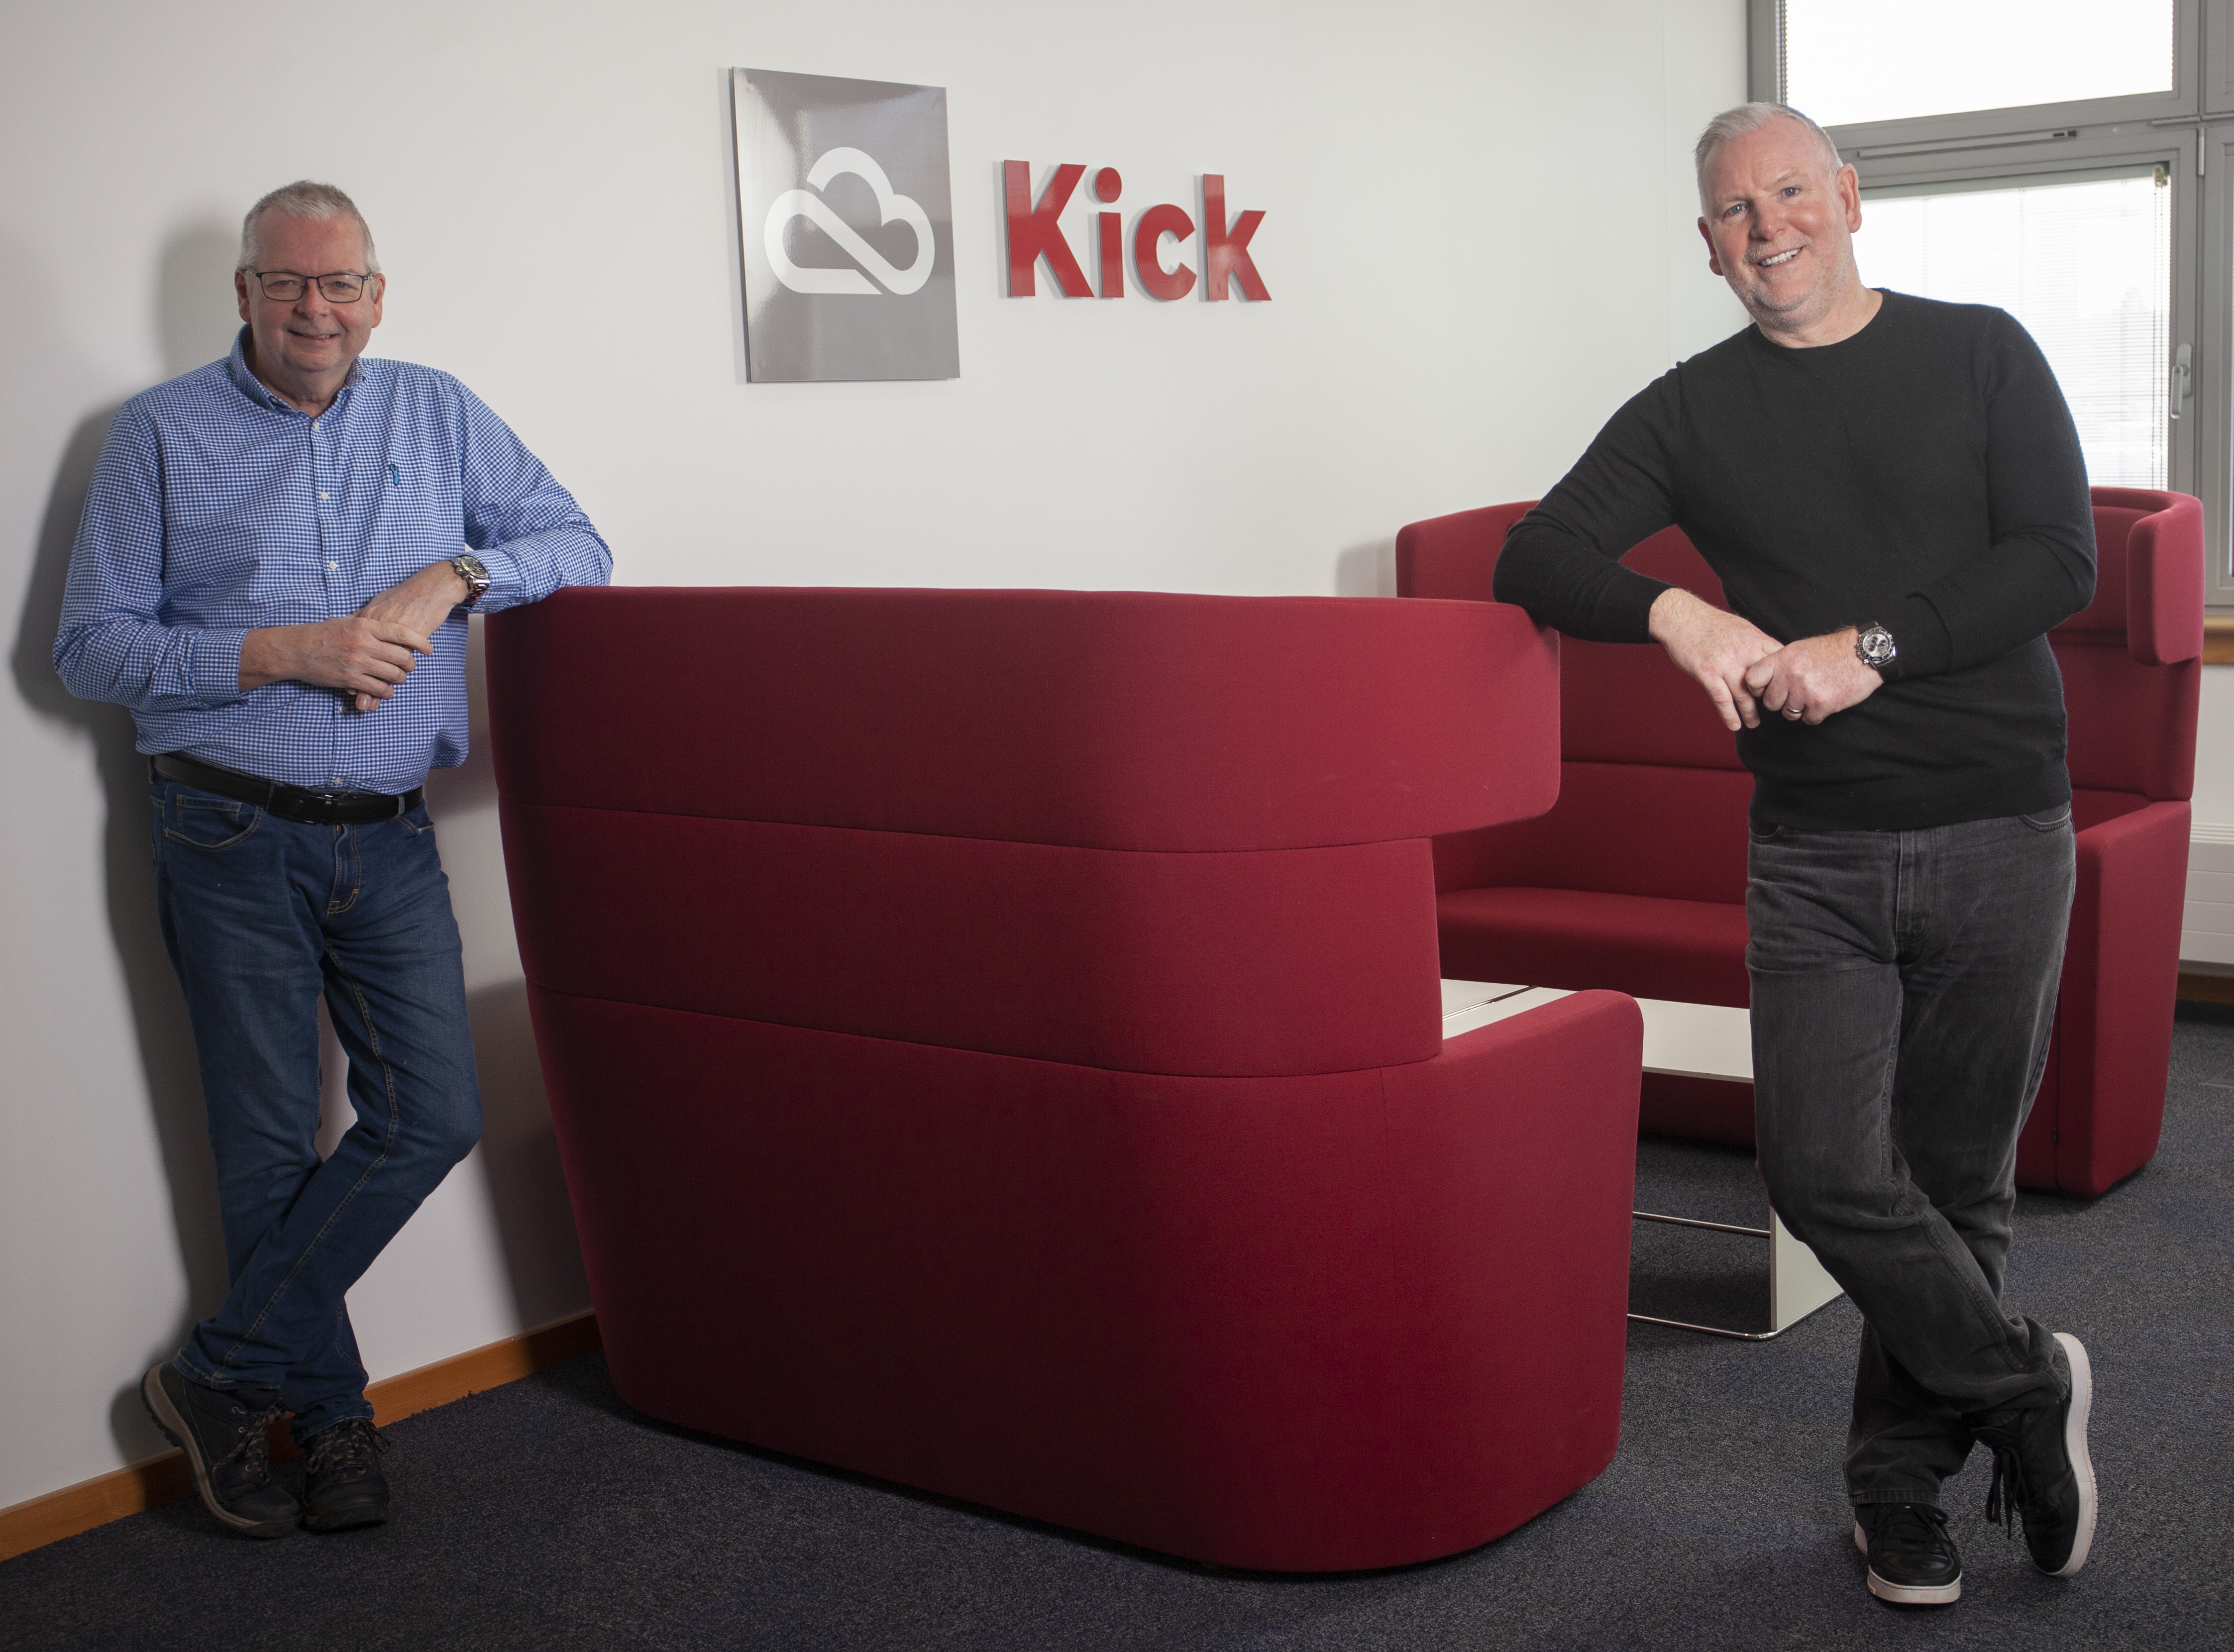 BGF invests £8.7m in Kick ICT to support its ongoing growth journey